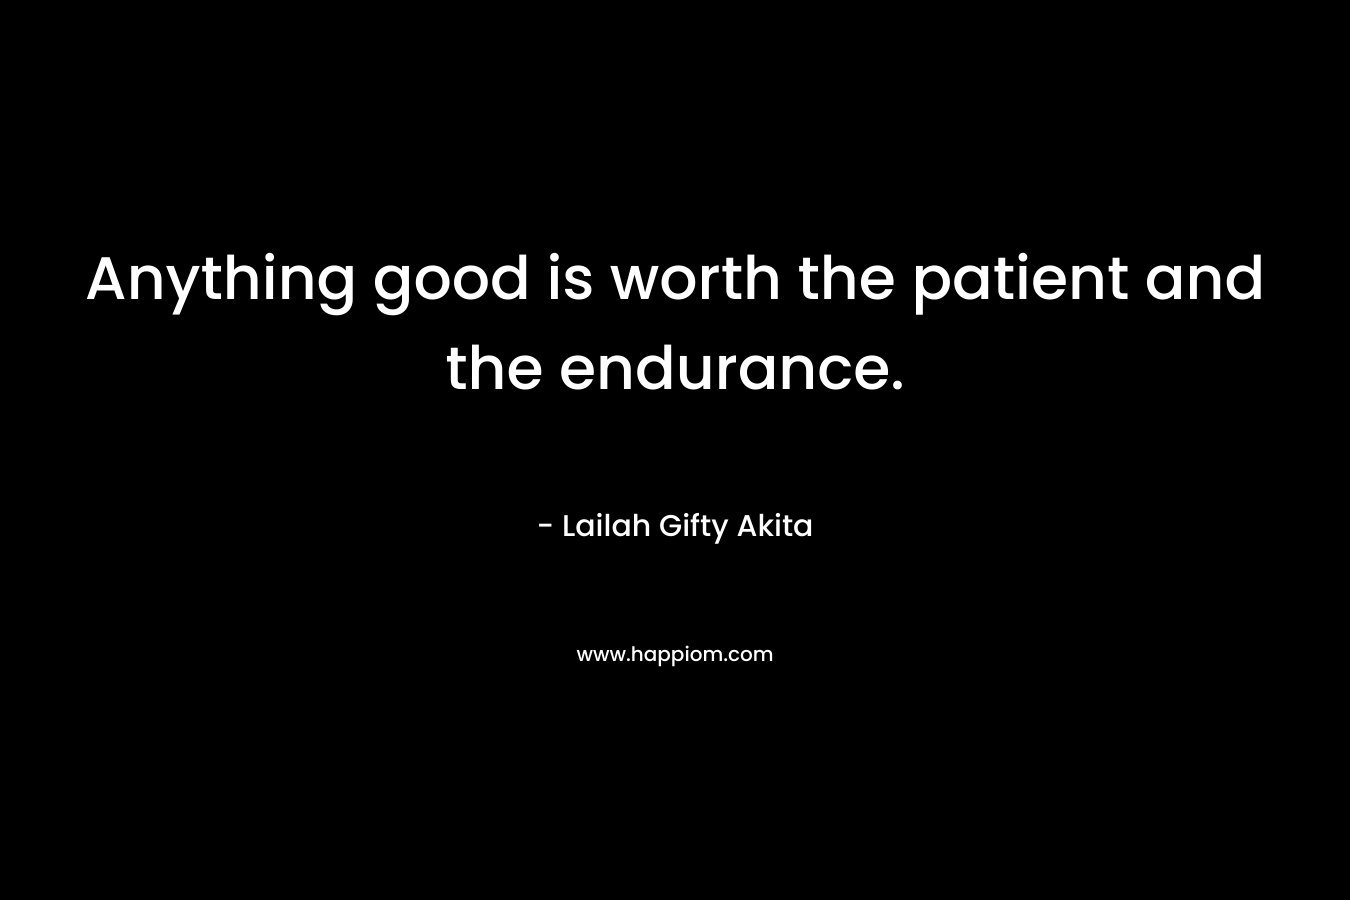 Anything good is worth the patient and the endurance.